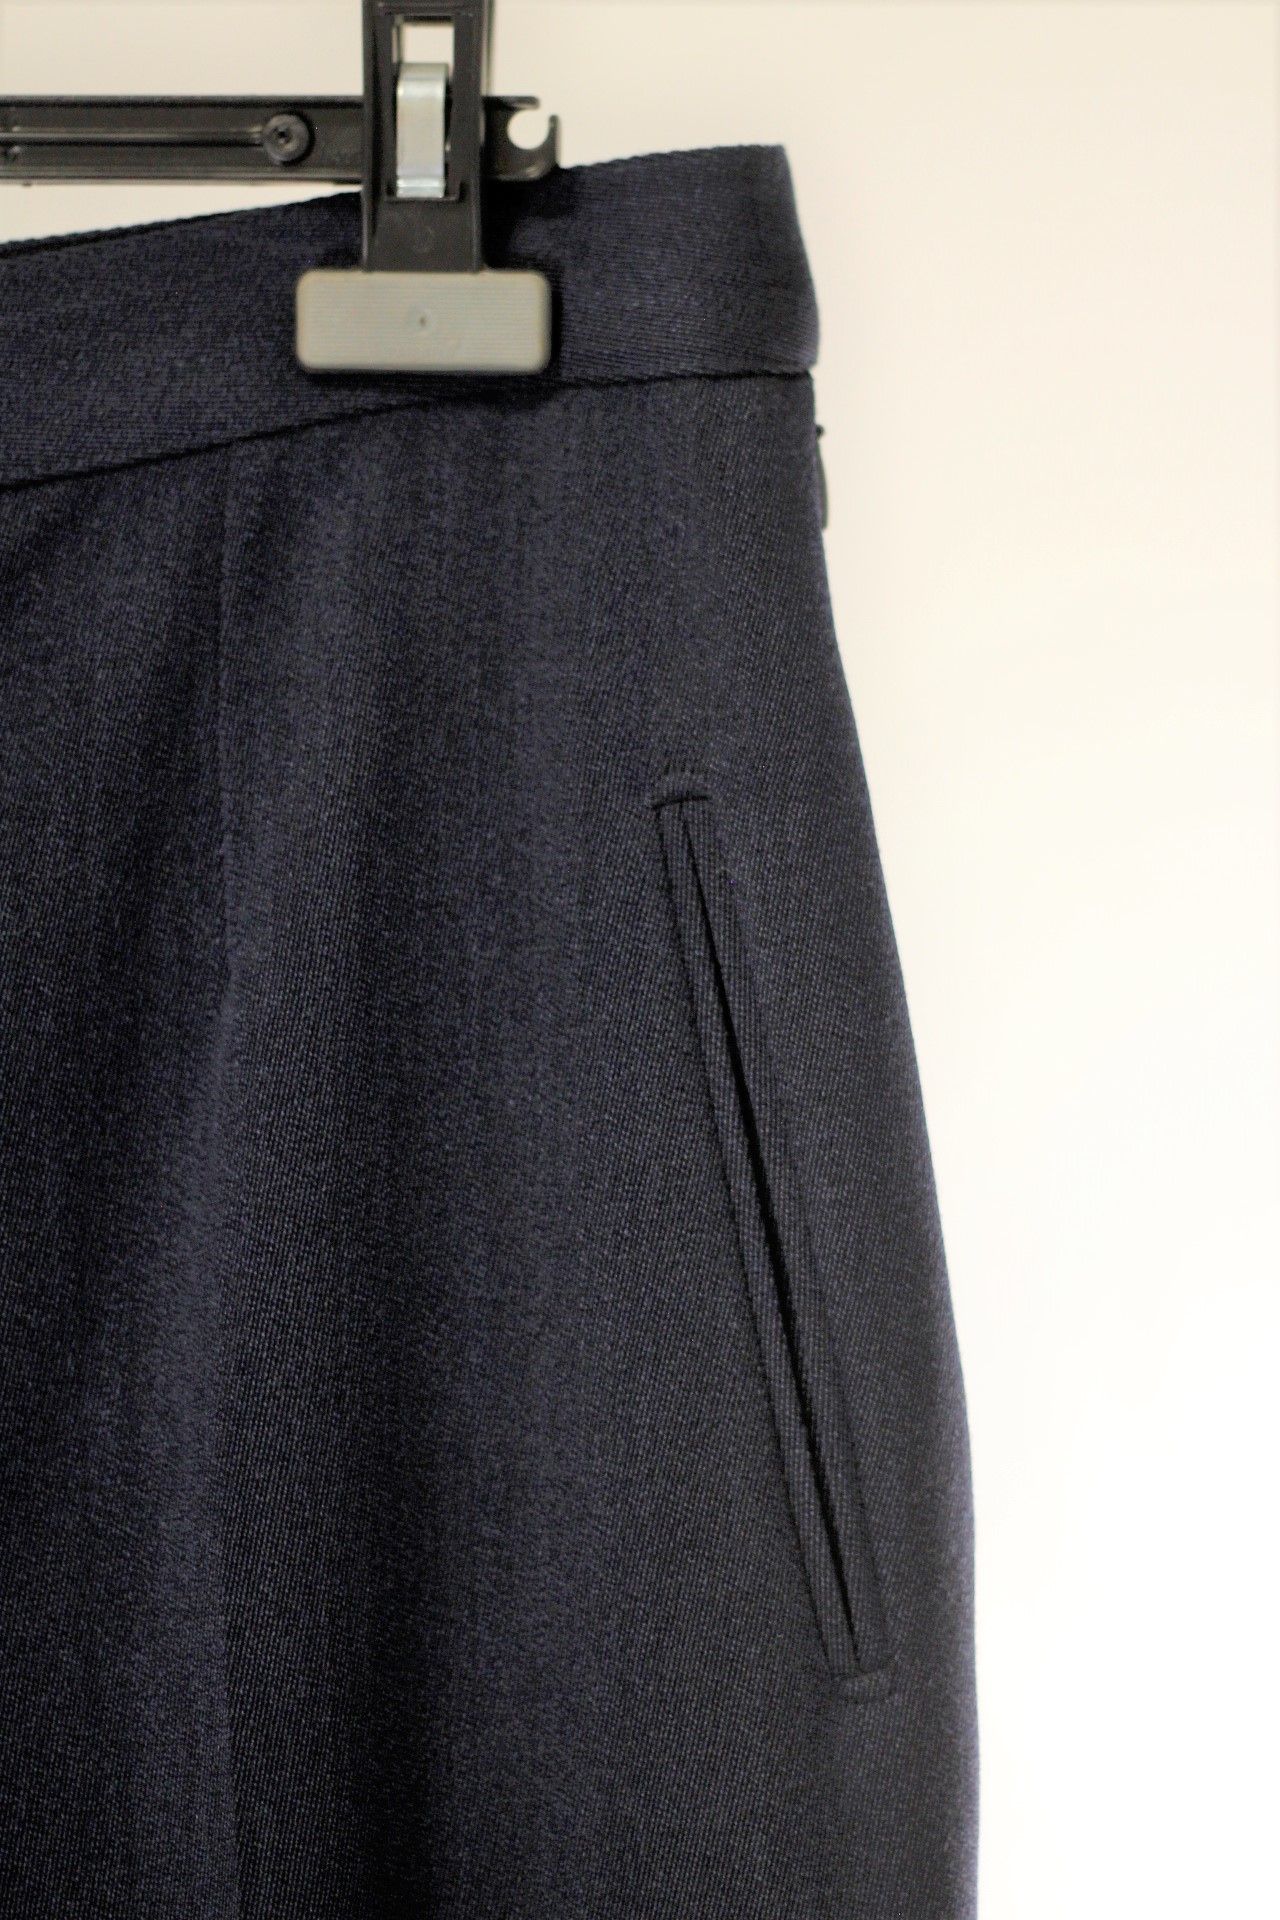 1 x Belvest Navy Trousers - Size: 26 - Material: Wool/ Cotton - From a High End Clothing Boutique In - Image 5 of 9